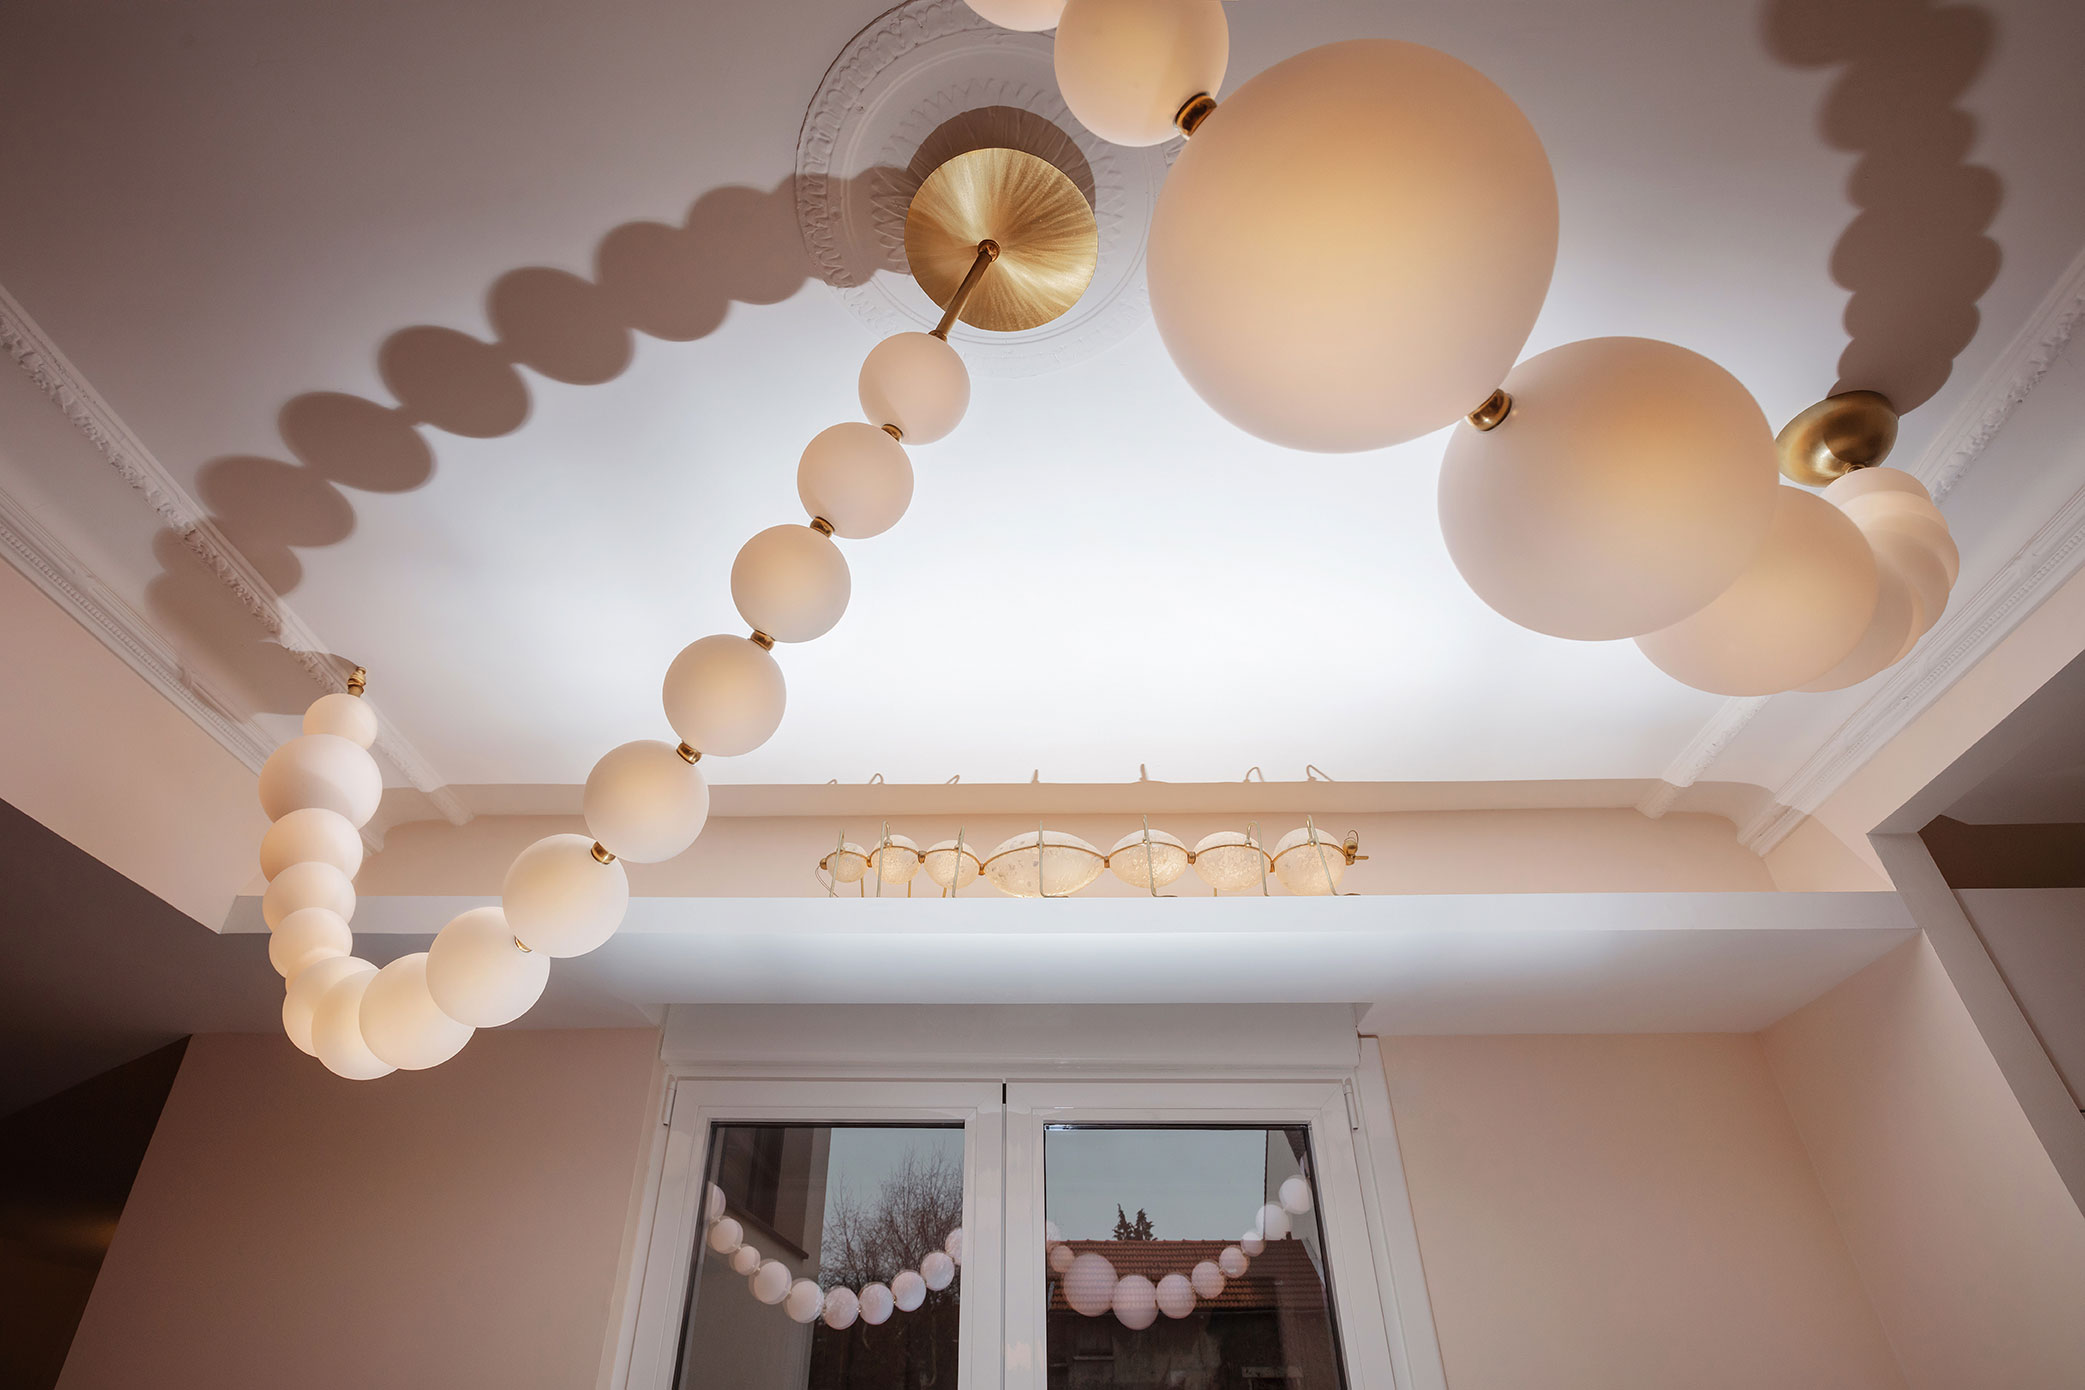 Pearl Necklace chandeliers and Caterpillar